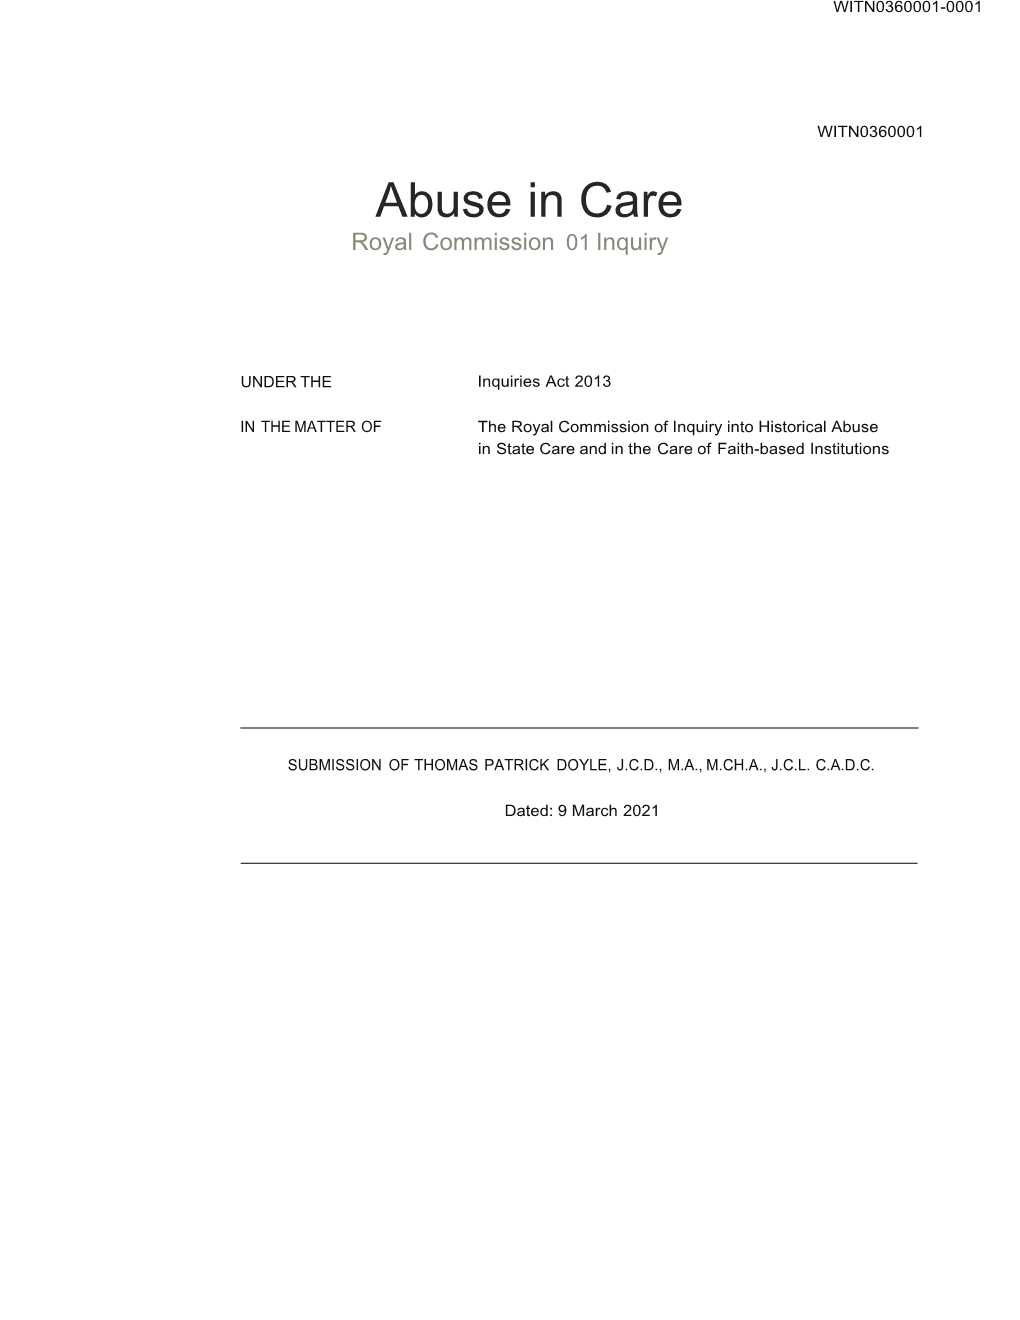 Abuse in Care Royal Commission 01 Inquiry